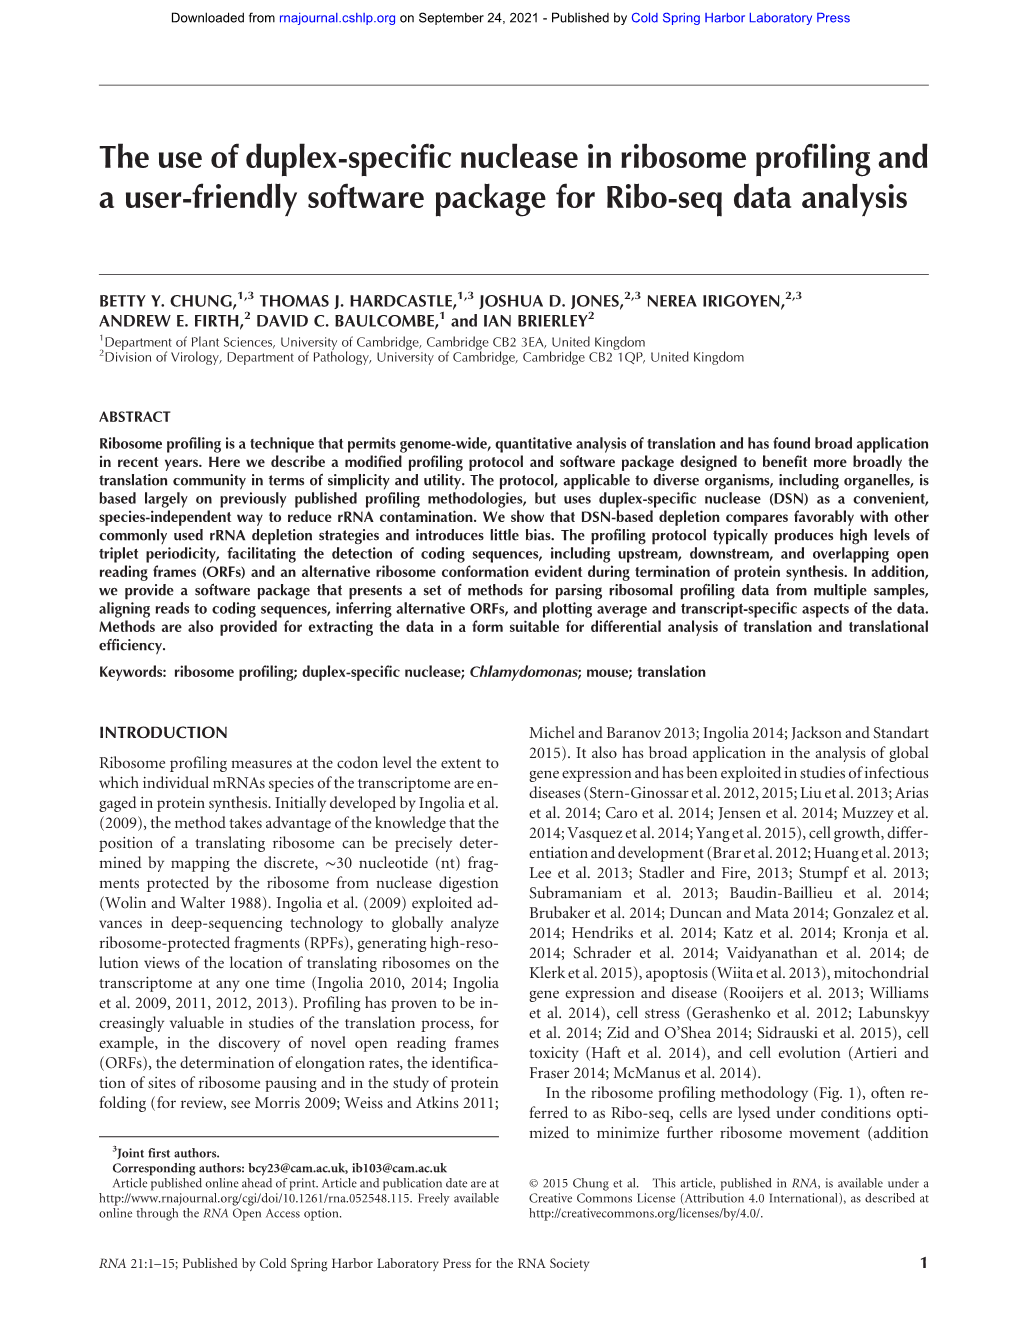 The Use of Duplex-Specific Nuclease in Ribosome Profiling and a User-Friendly Software Package for Ribo-Seq Data Analysis